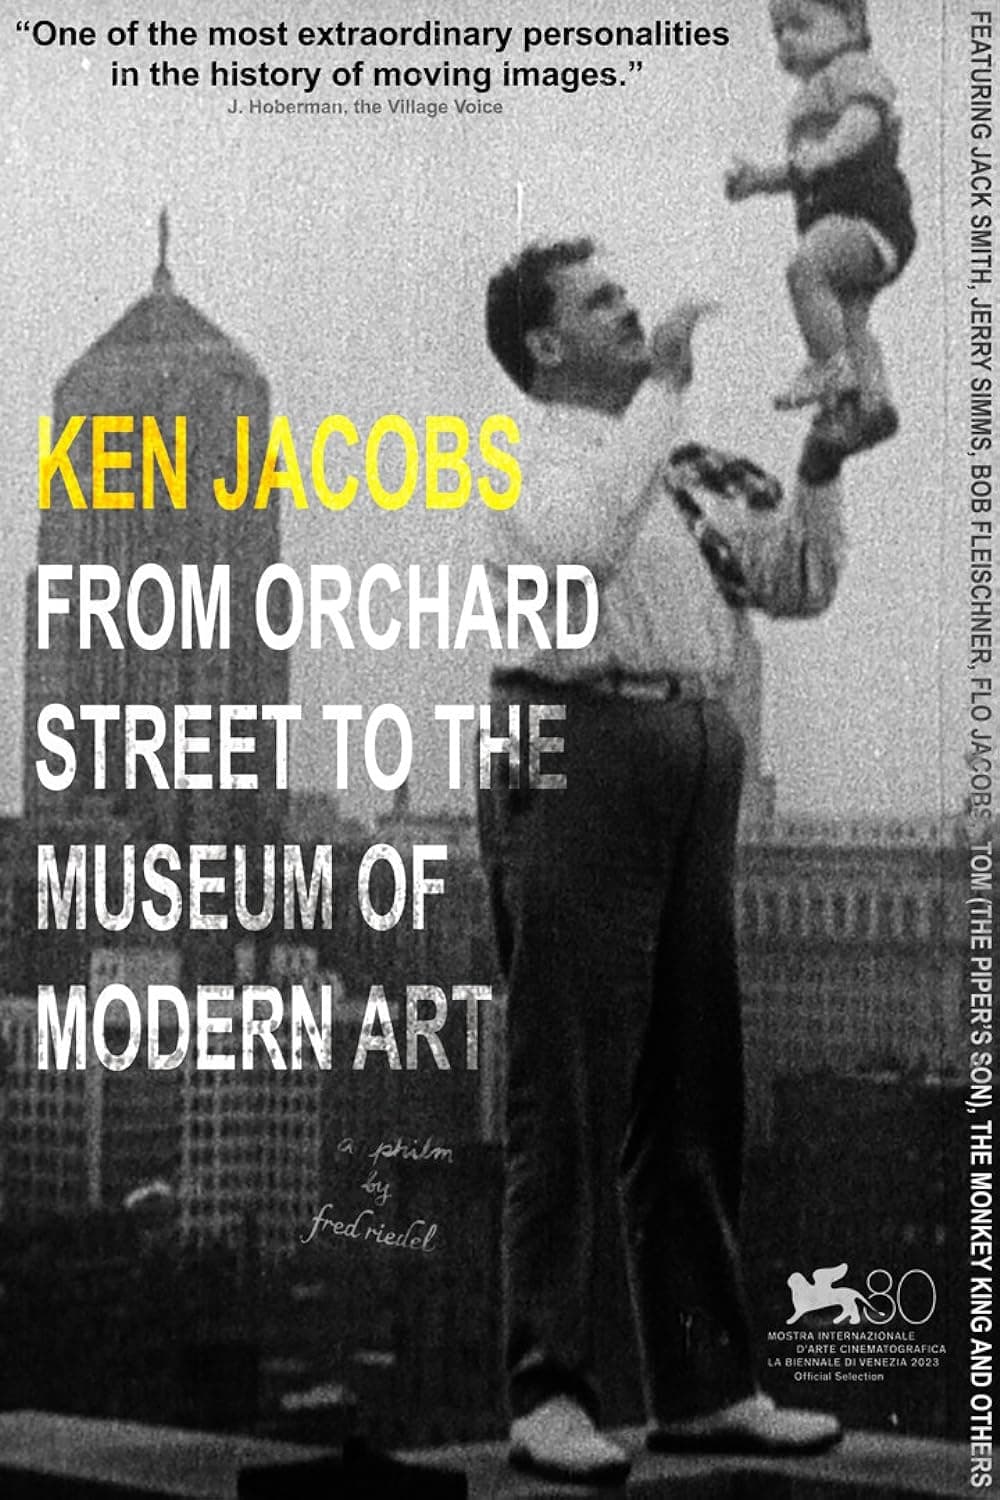 Ken Jacobs - from Orchard Street to the Museum of Modern Art